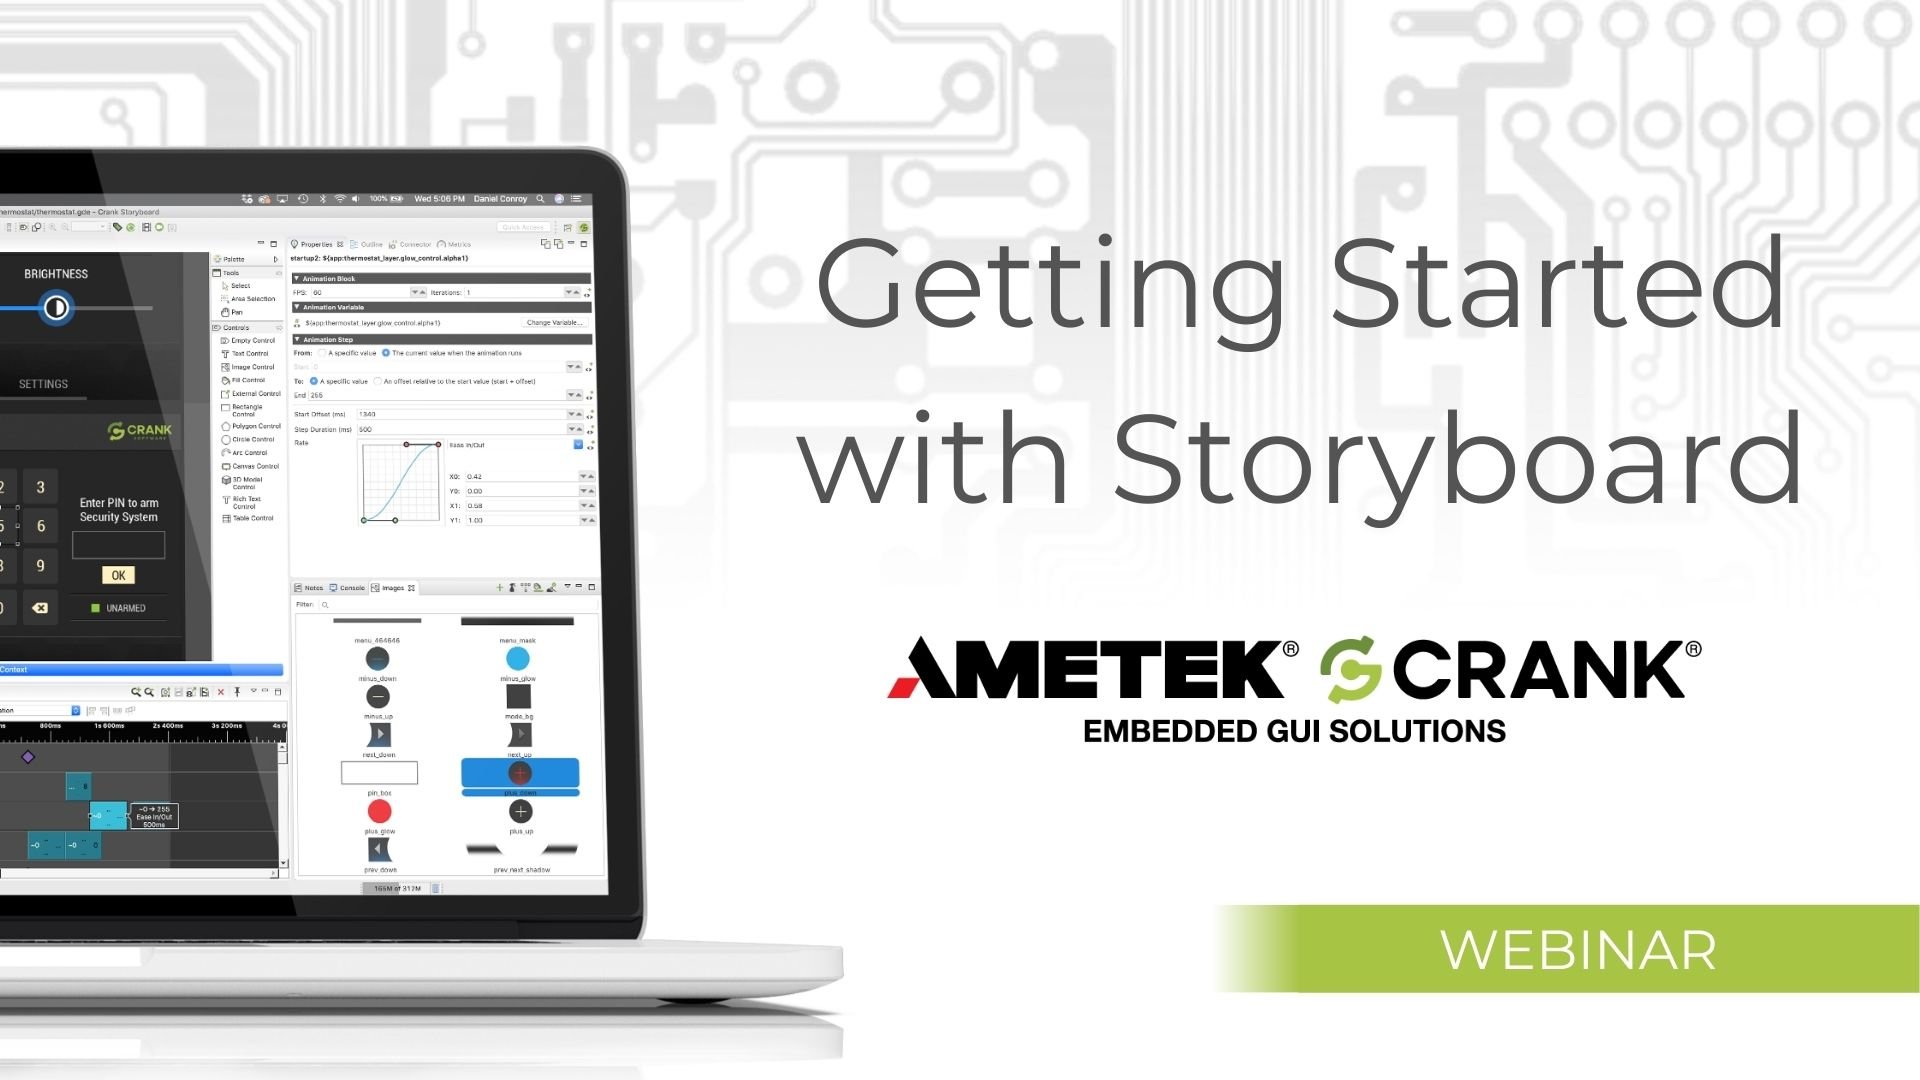 Getting Started with Storyboard Webinar